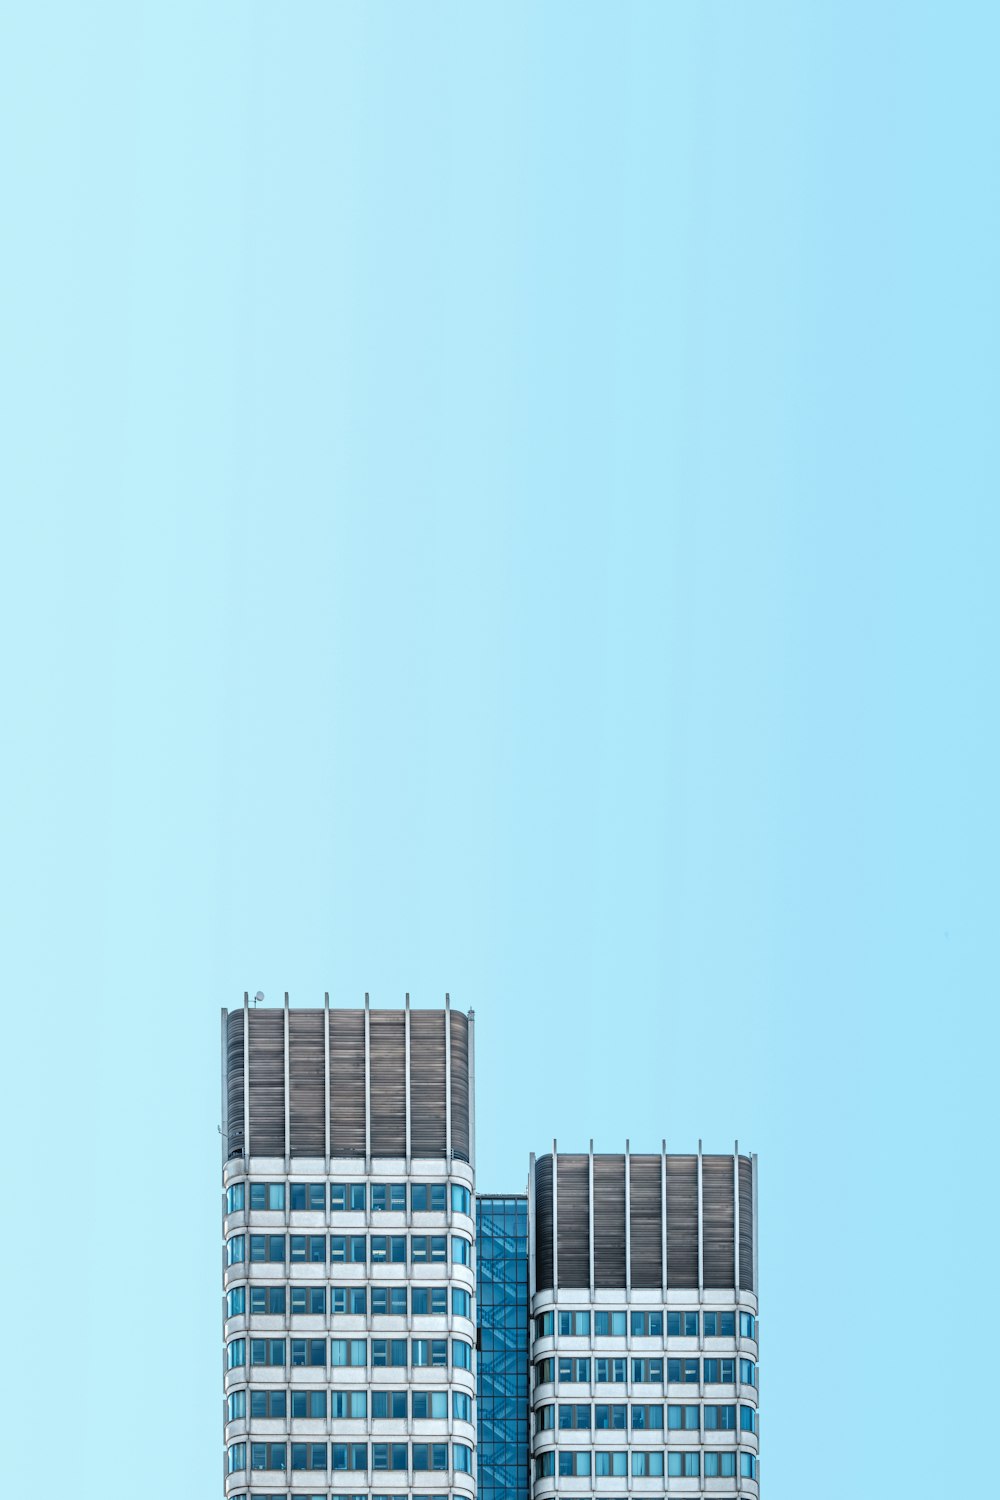 a plane flying over a tall building on a clear day